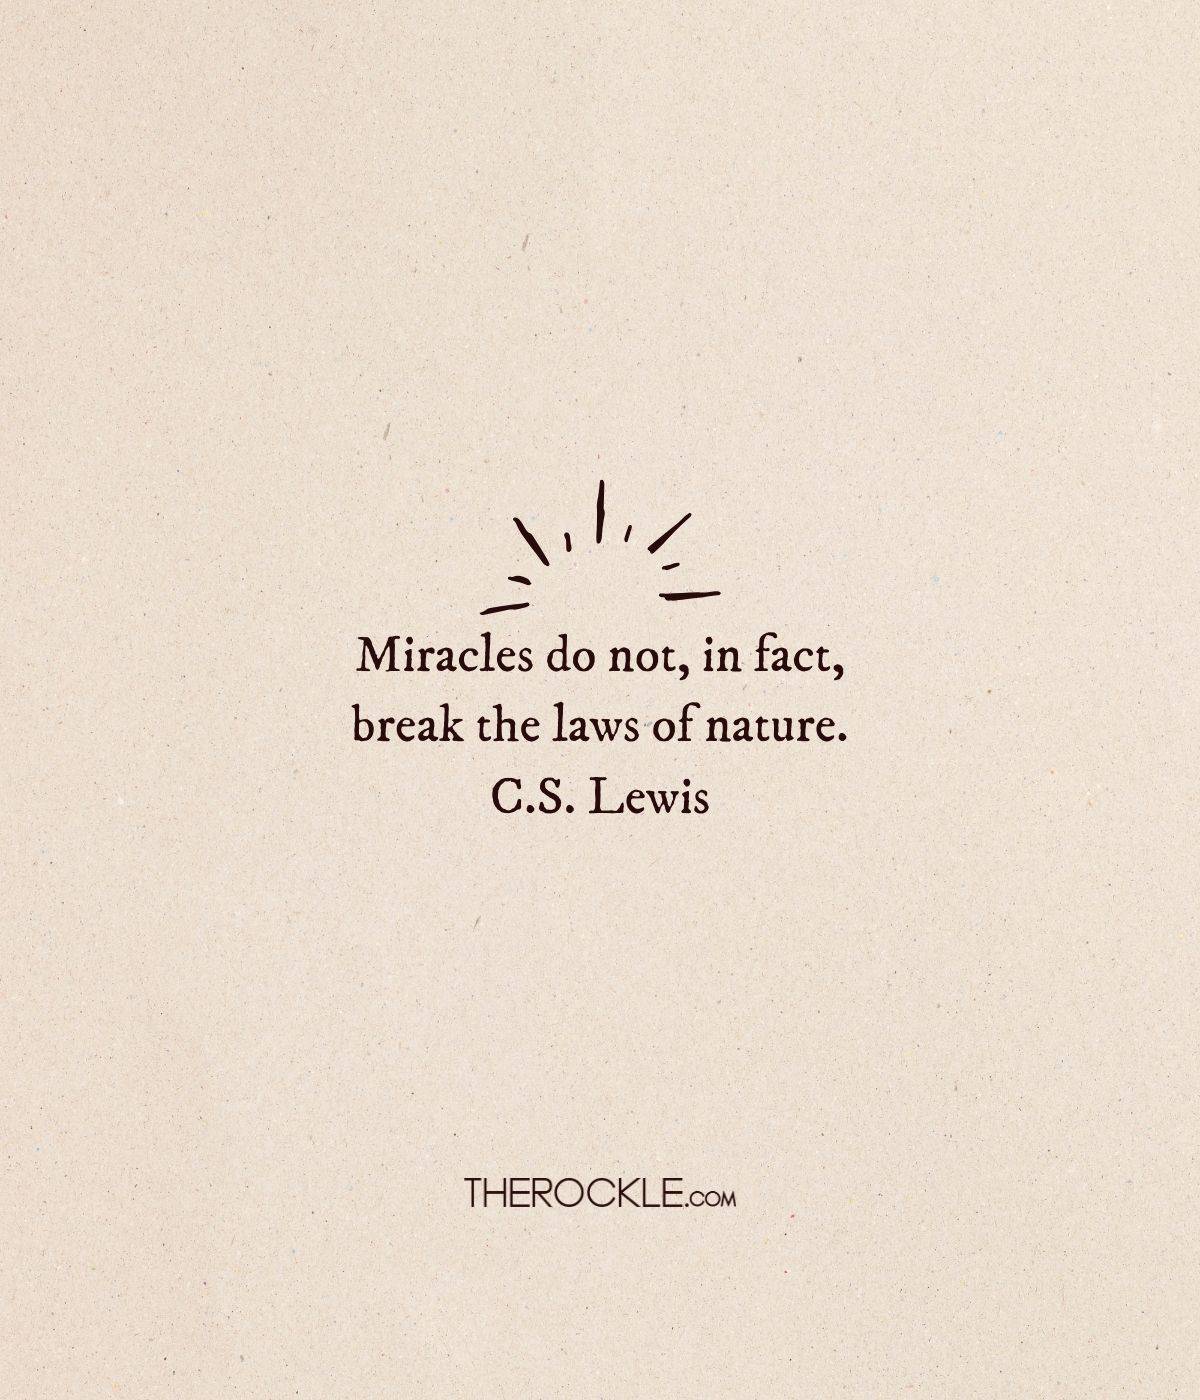 C.S. Lewis on miracles